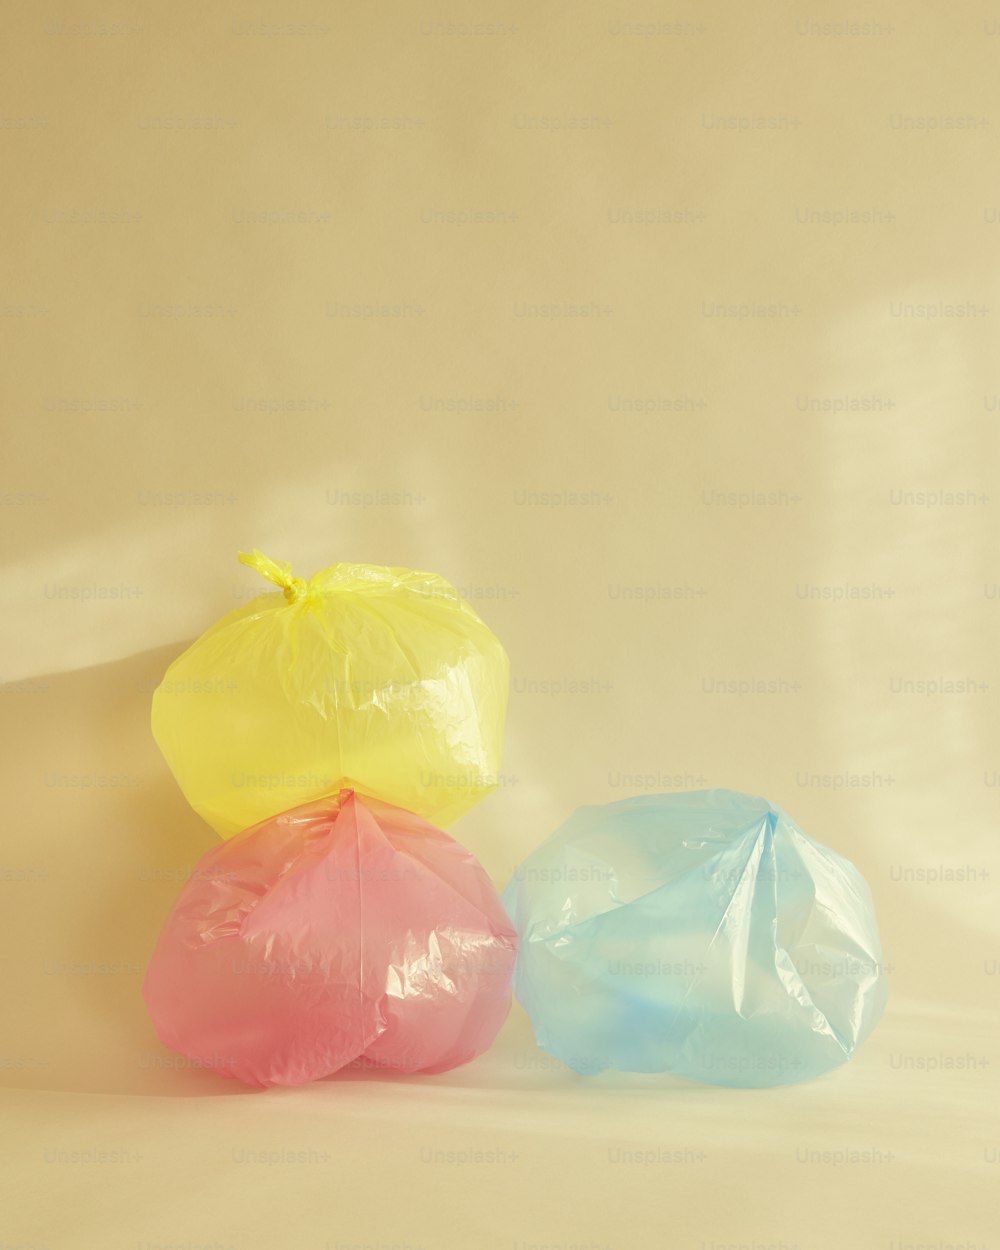 three plastic bags of different colors on a beige background